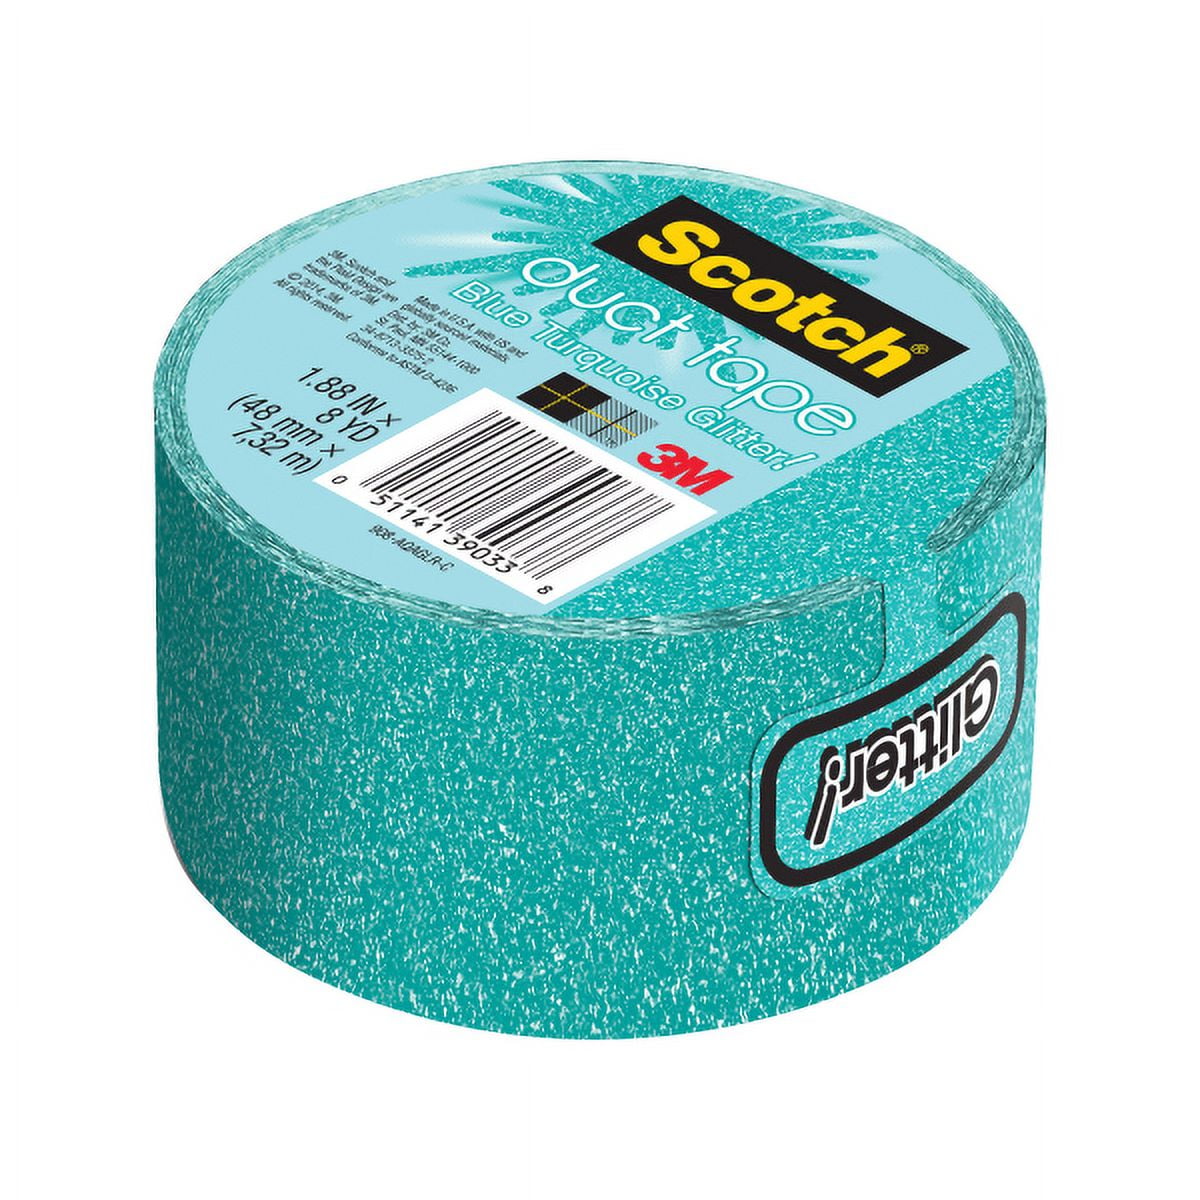 Scotch 1.88-in x 30-ft Pink Paisley Duct Tape at